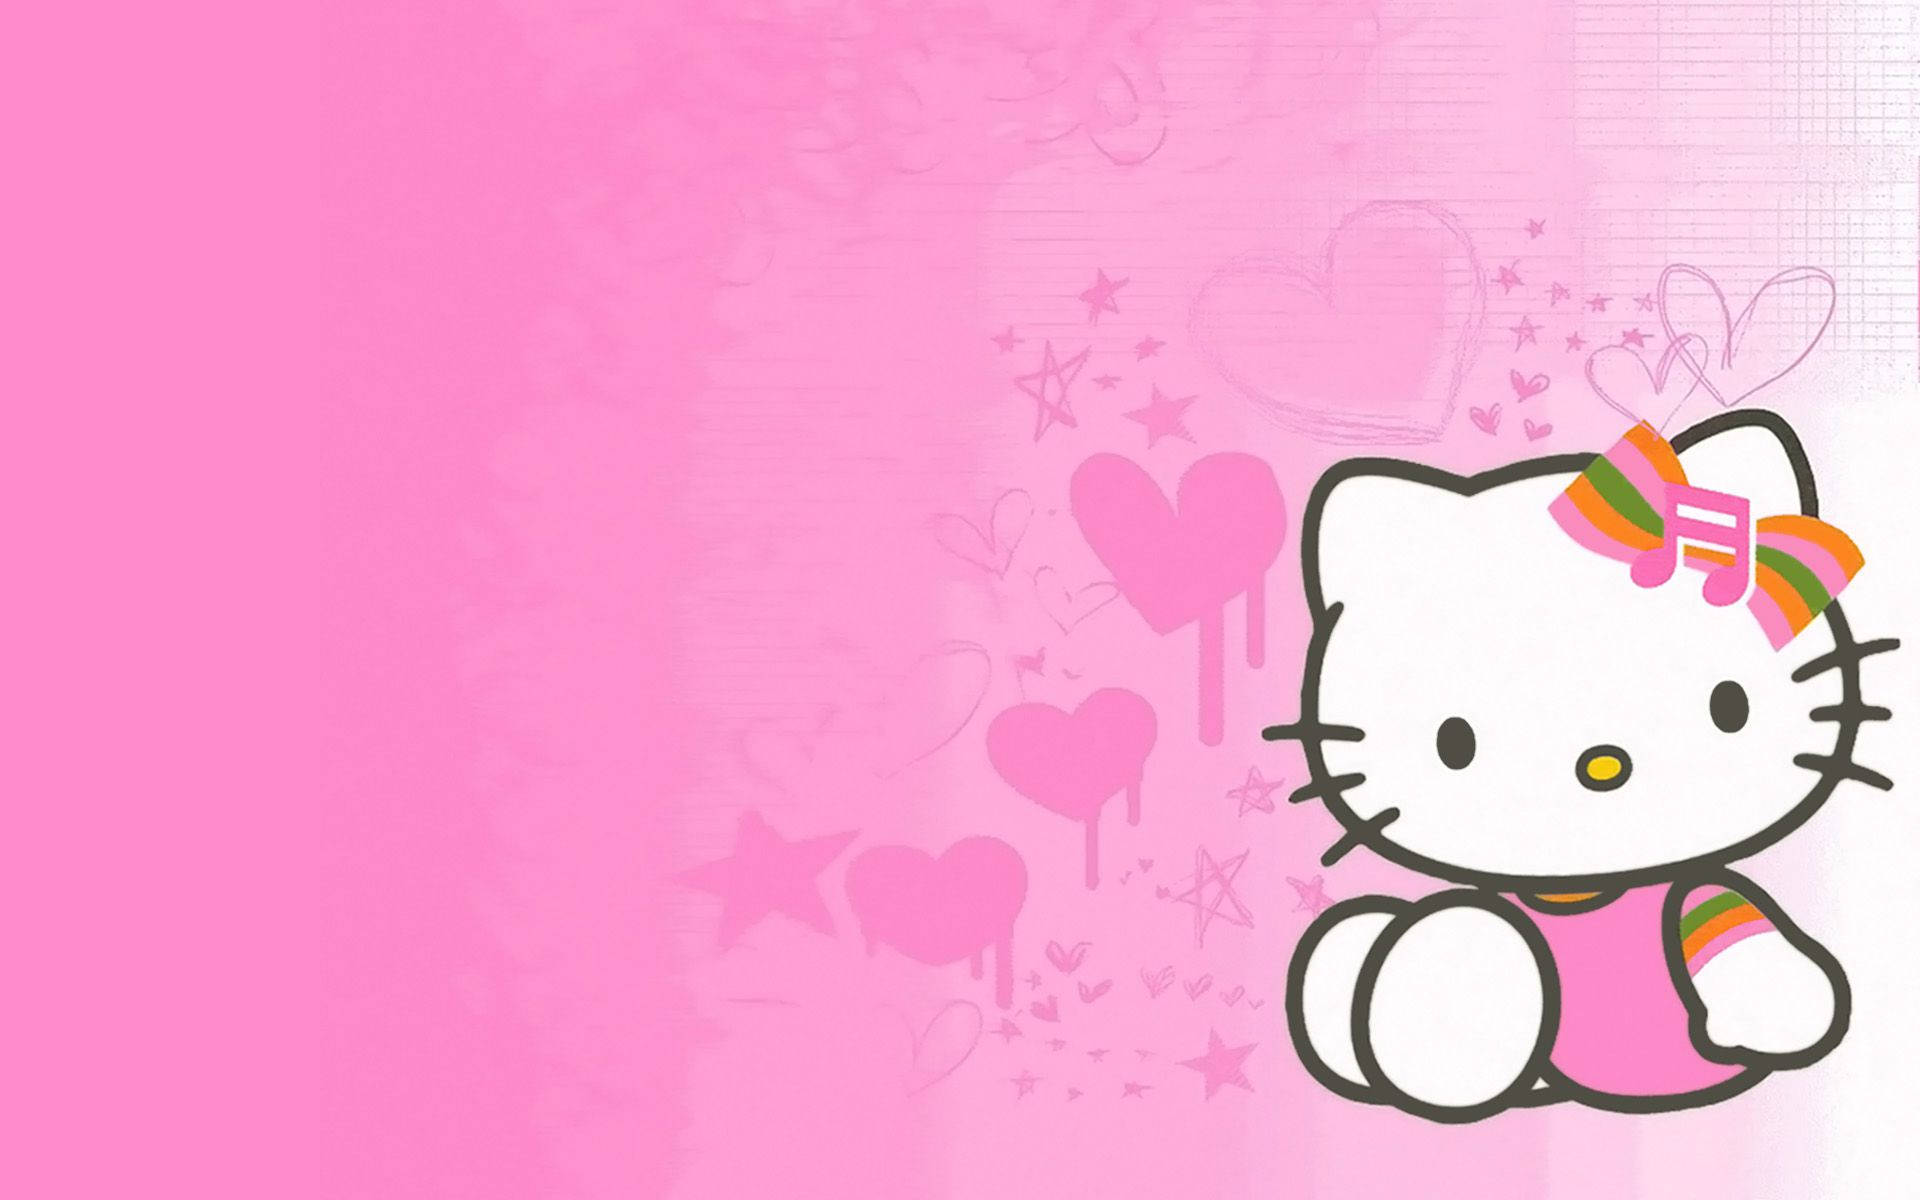 Free Hello Kitty Wallpaper Downloads, [200+] Hello Kitty Wallpapers for  FREE 